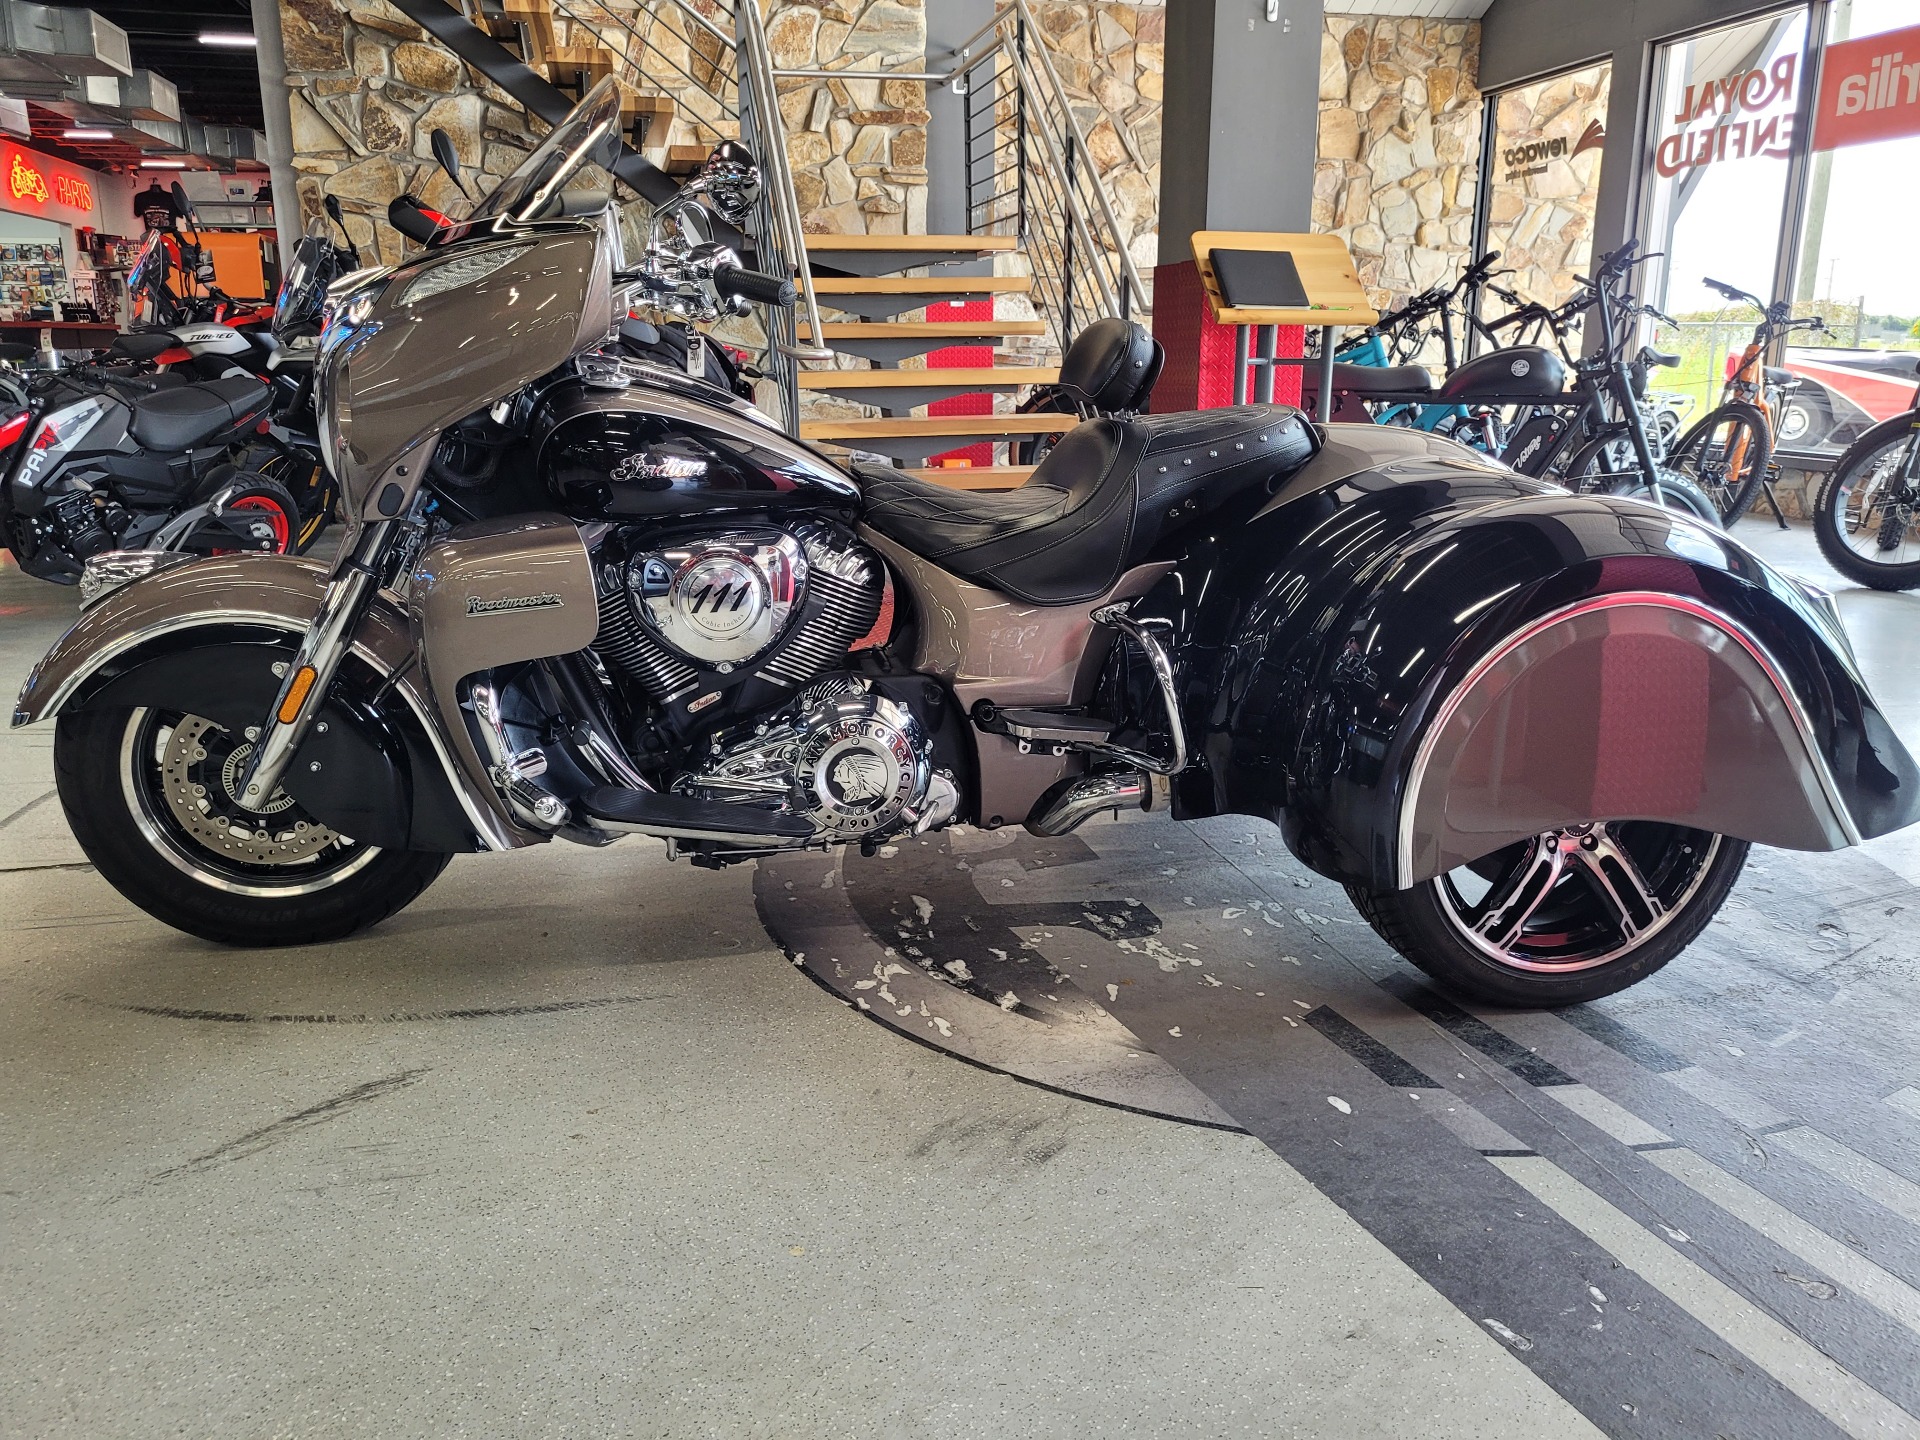 2018 Indian Motorcycle Roadmaster® ABS in Fort Myers, Florida - Photo 2